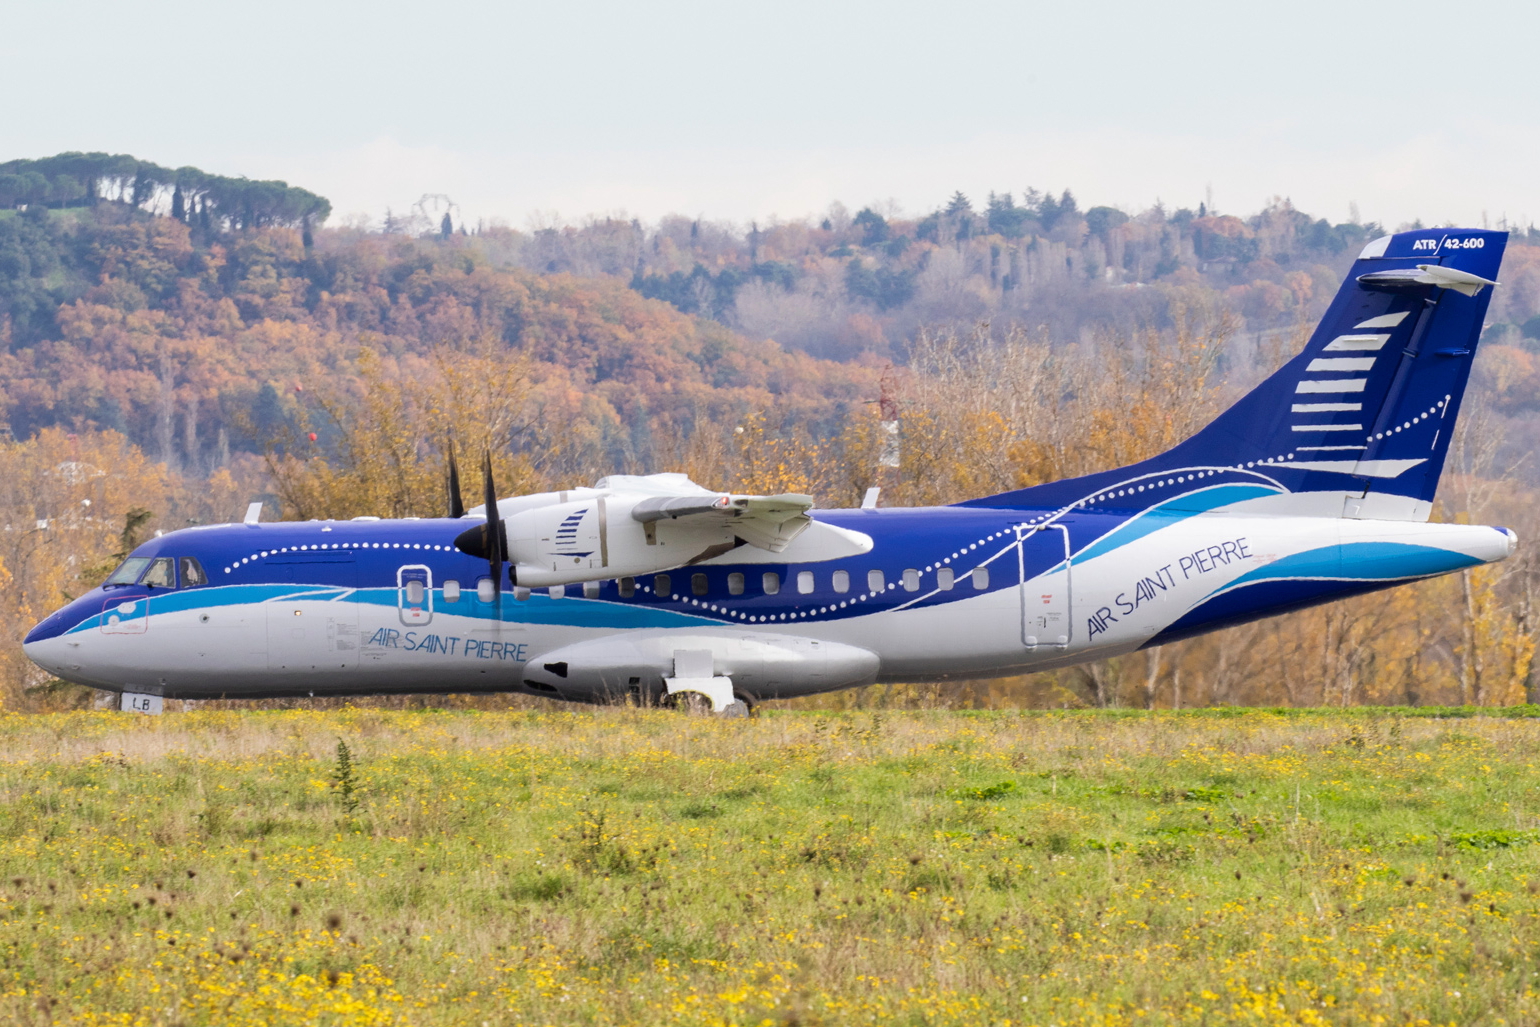 Air Saint-Pierre has taken delivery of a new ATR 42-600 aircraft. The new aircraft will replace the airline’s existing ATR 42-500 which has been in operation since 2009. Click to enlarge.